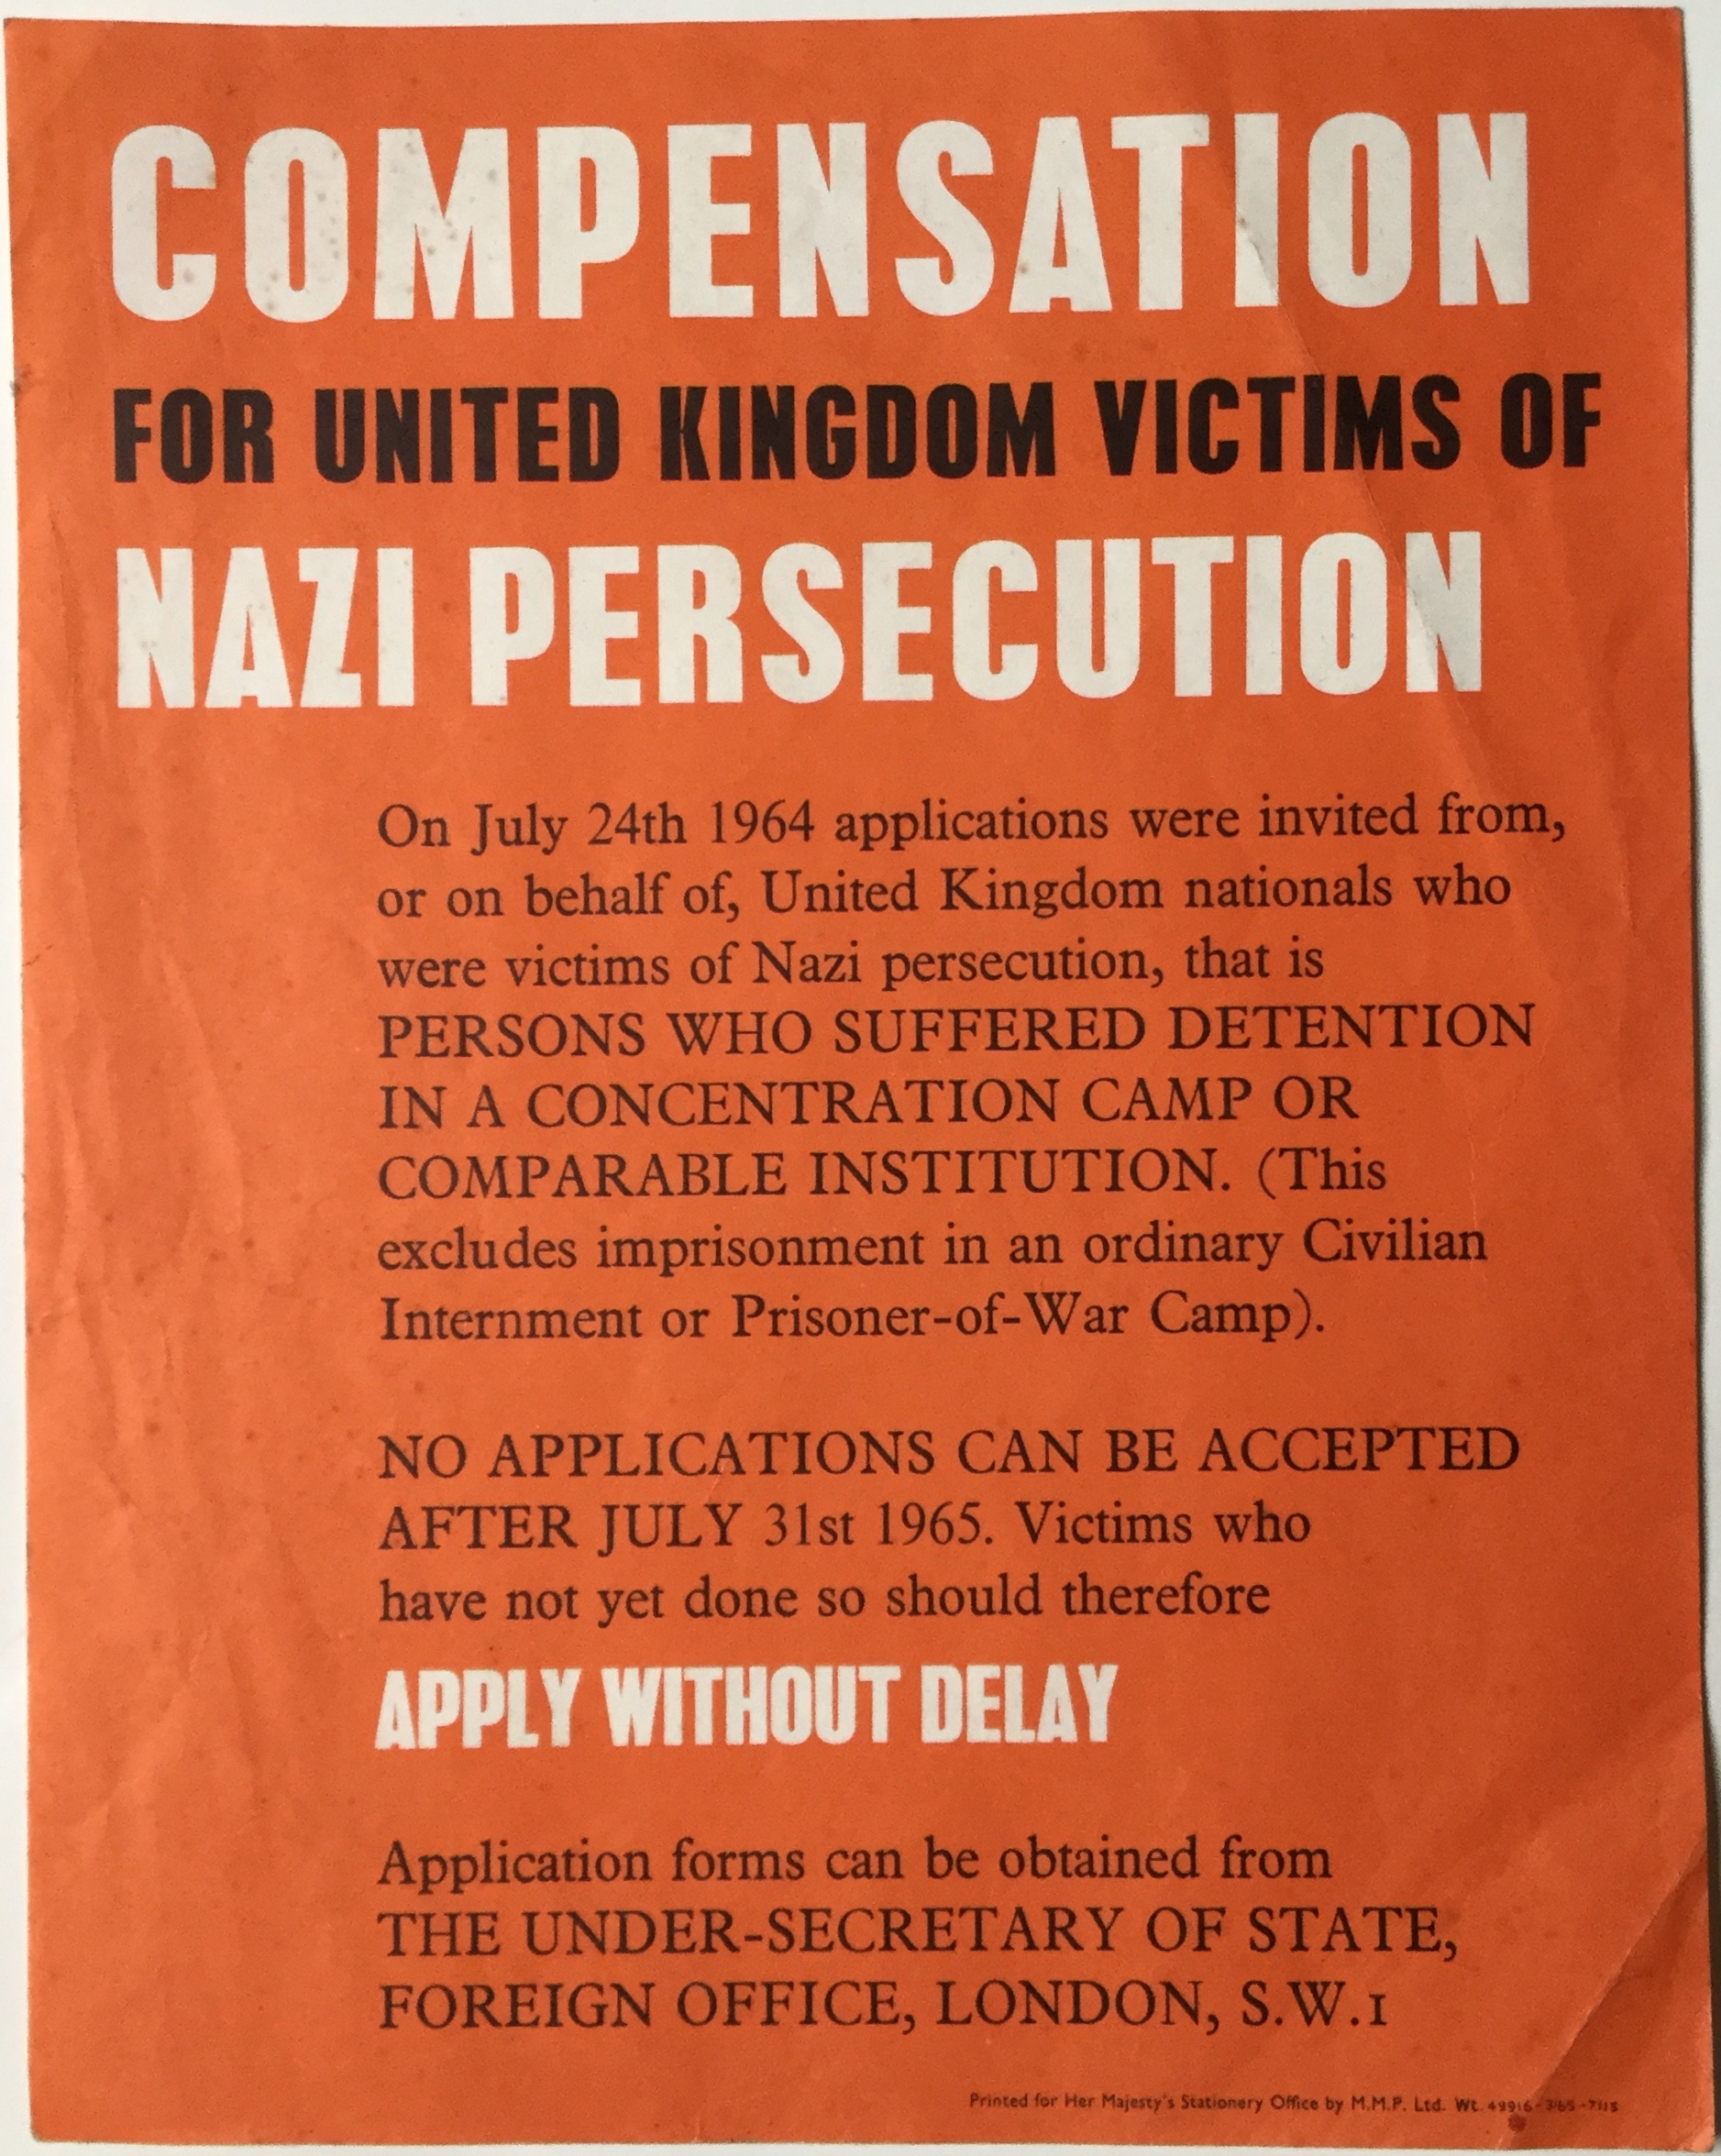 J483	COMPENSATION FOR THE UNITED KINGDOM VICTIMS OF NAZI PERSECUTION - APPLY WITHOUT DELAY